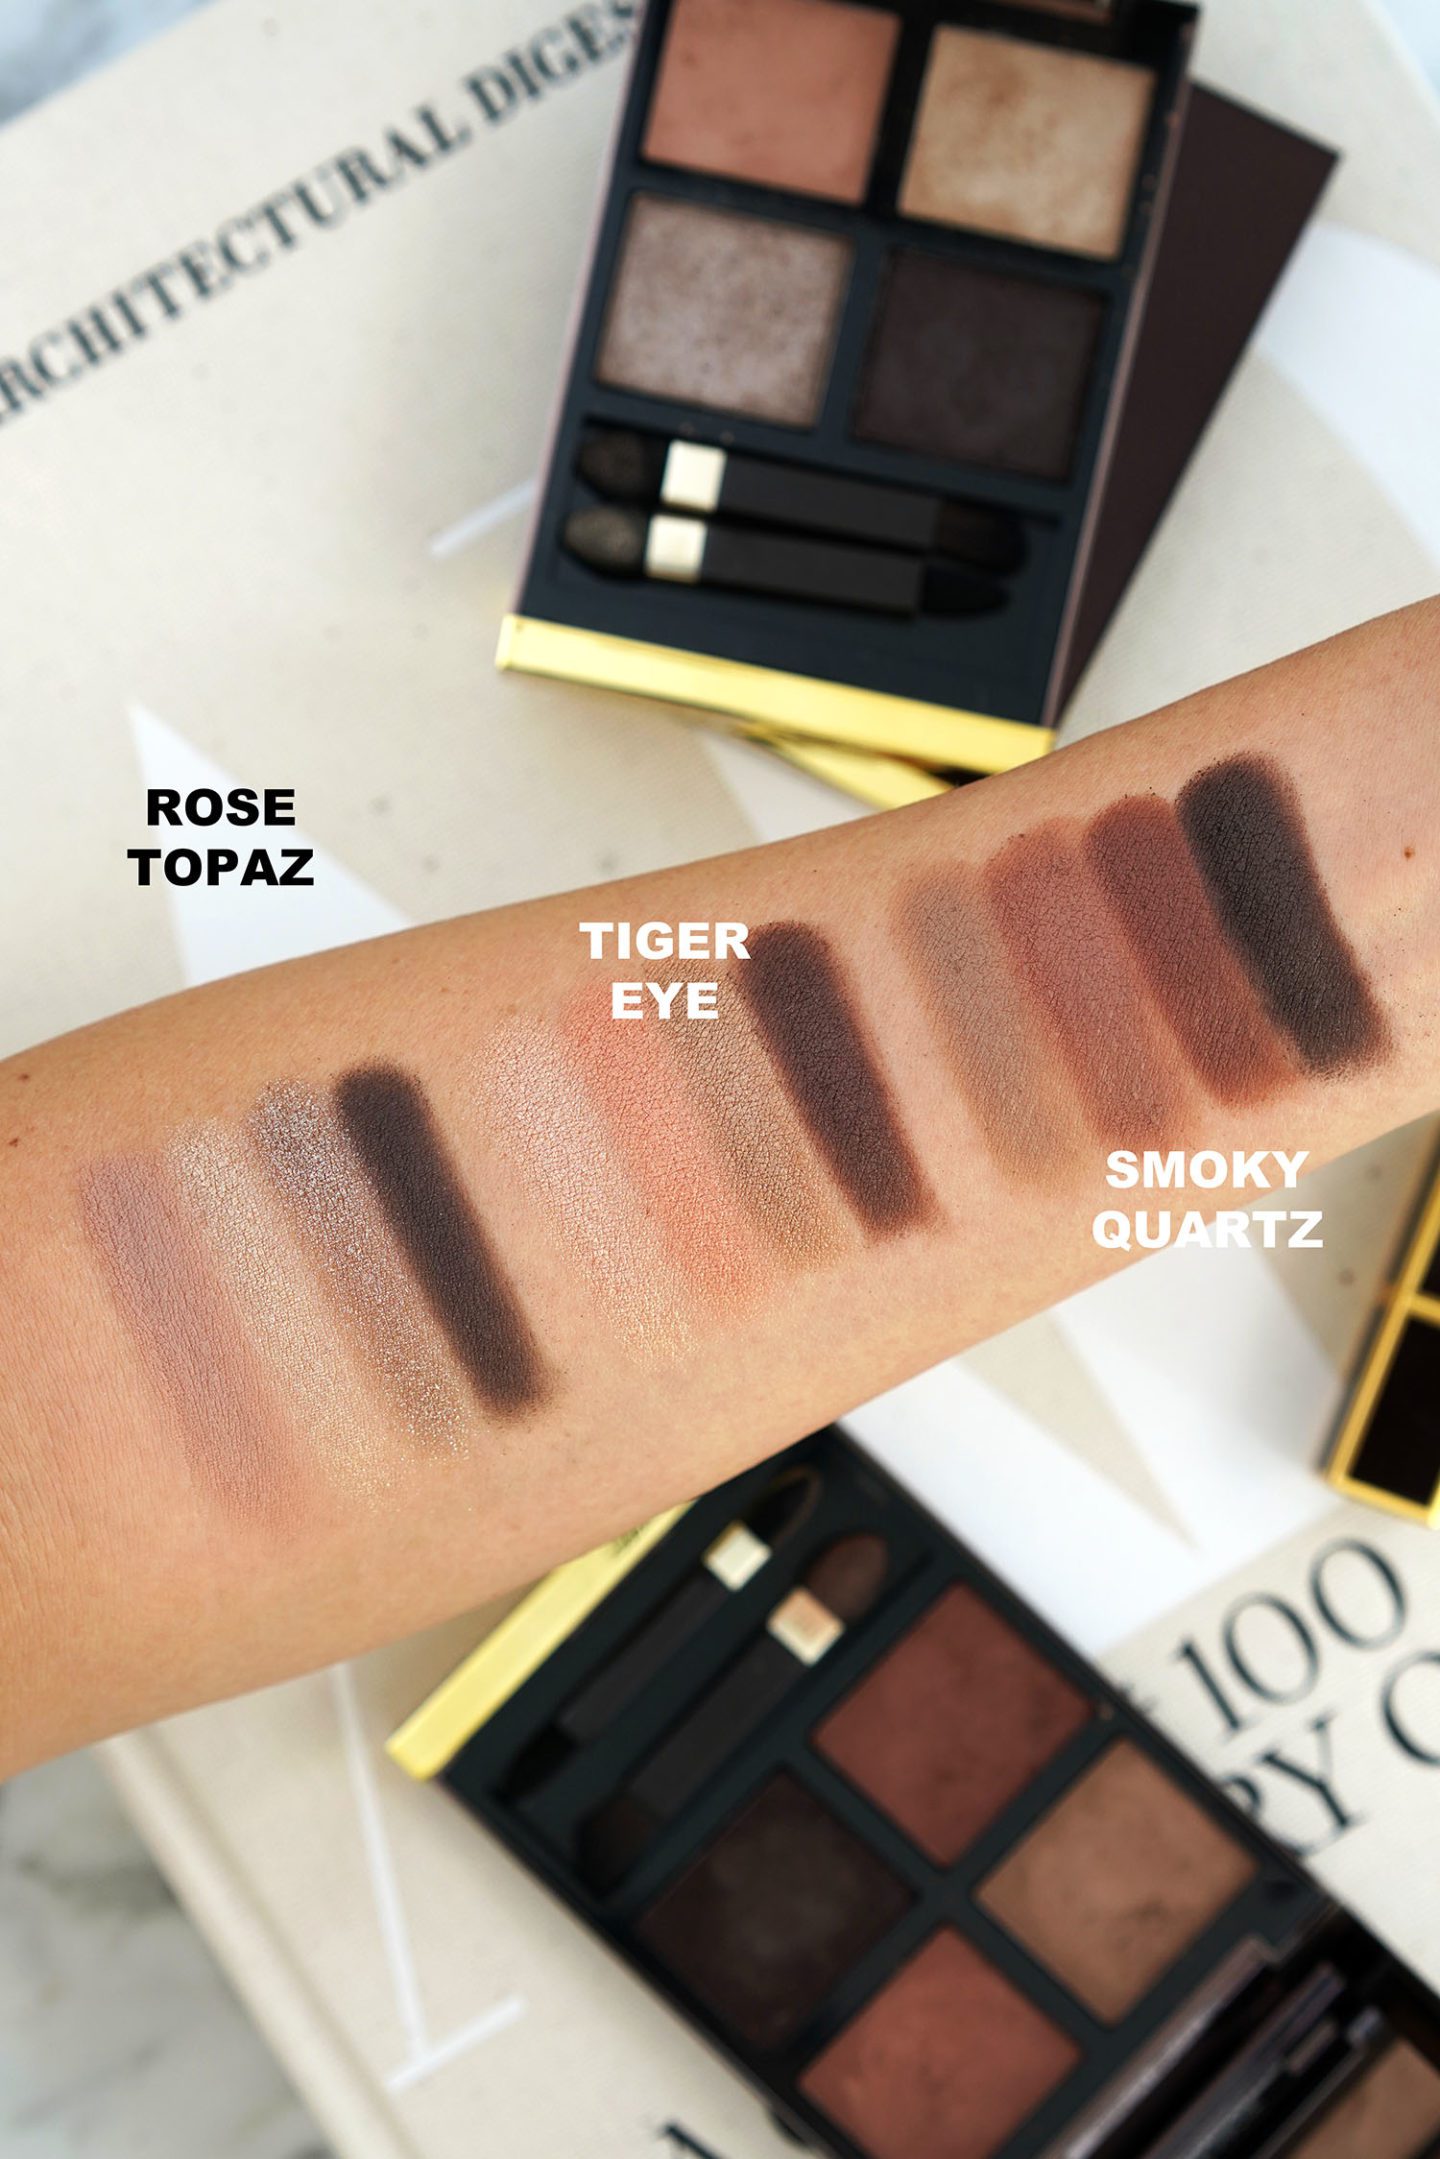 Tom Ford Eye Color Quad Creme swatches